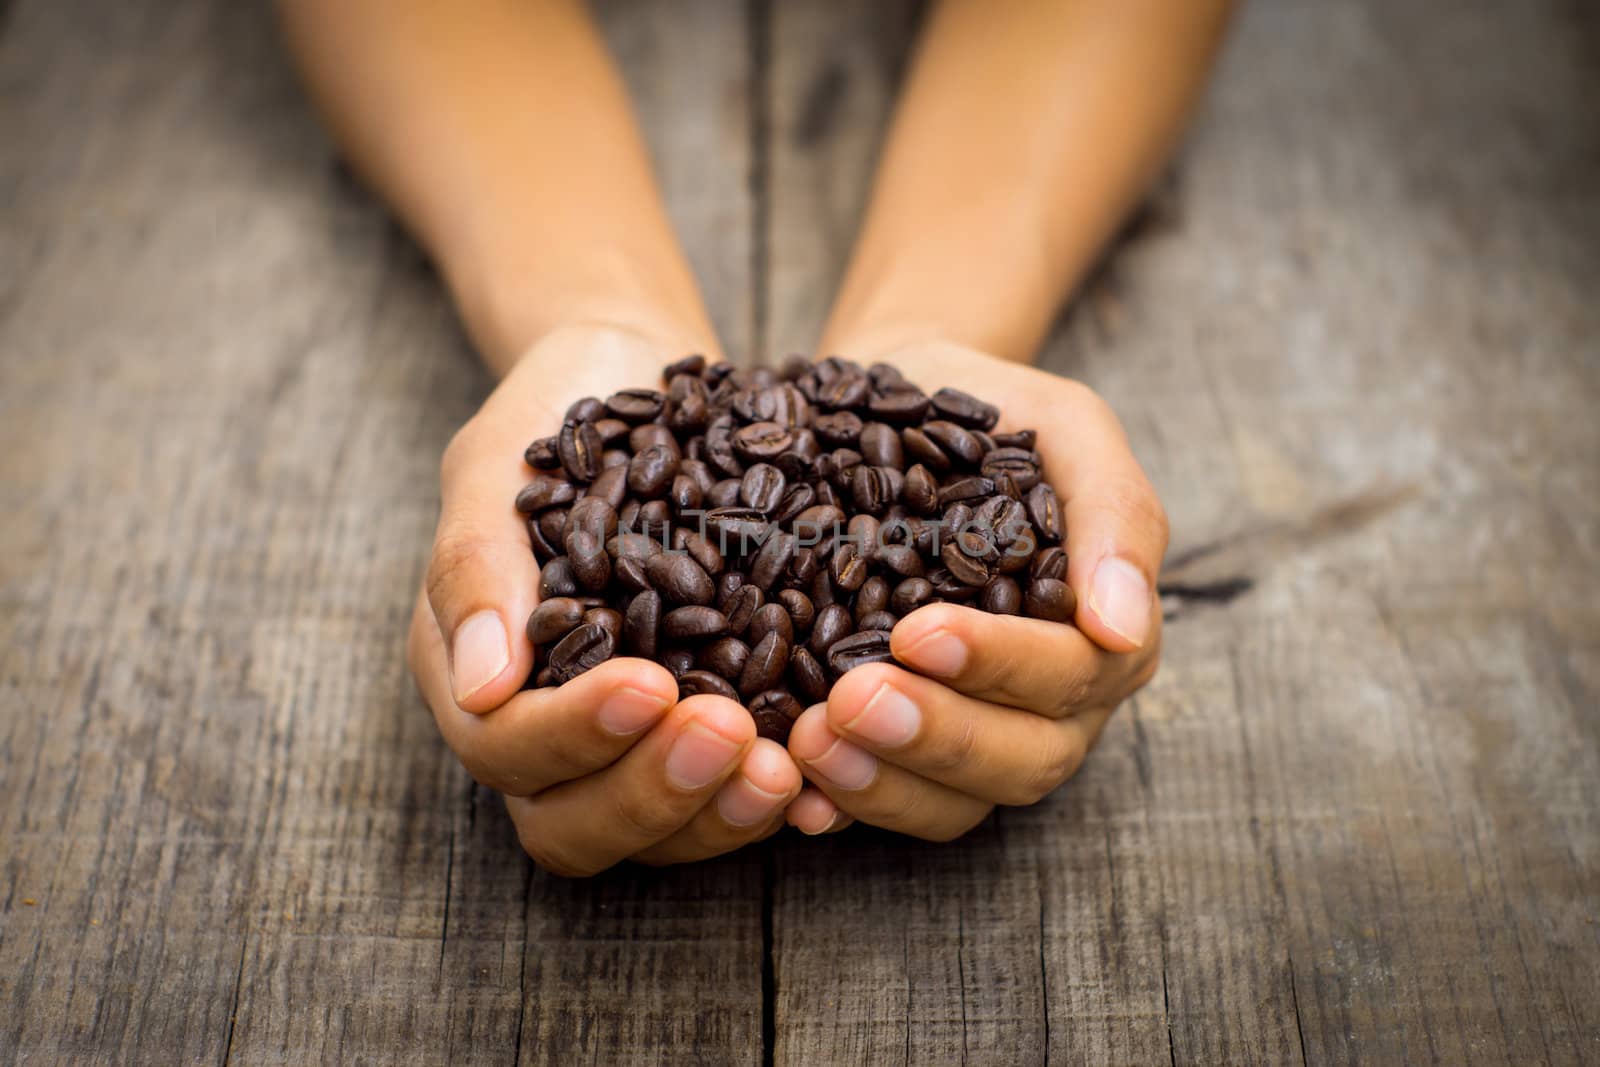 A person holding roasted coffee beans on wood background